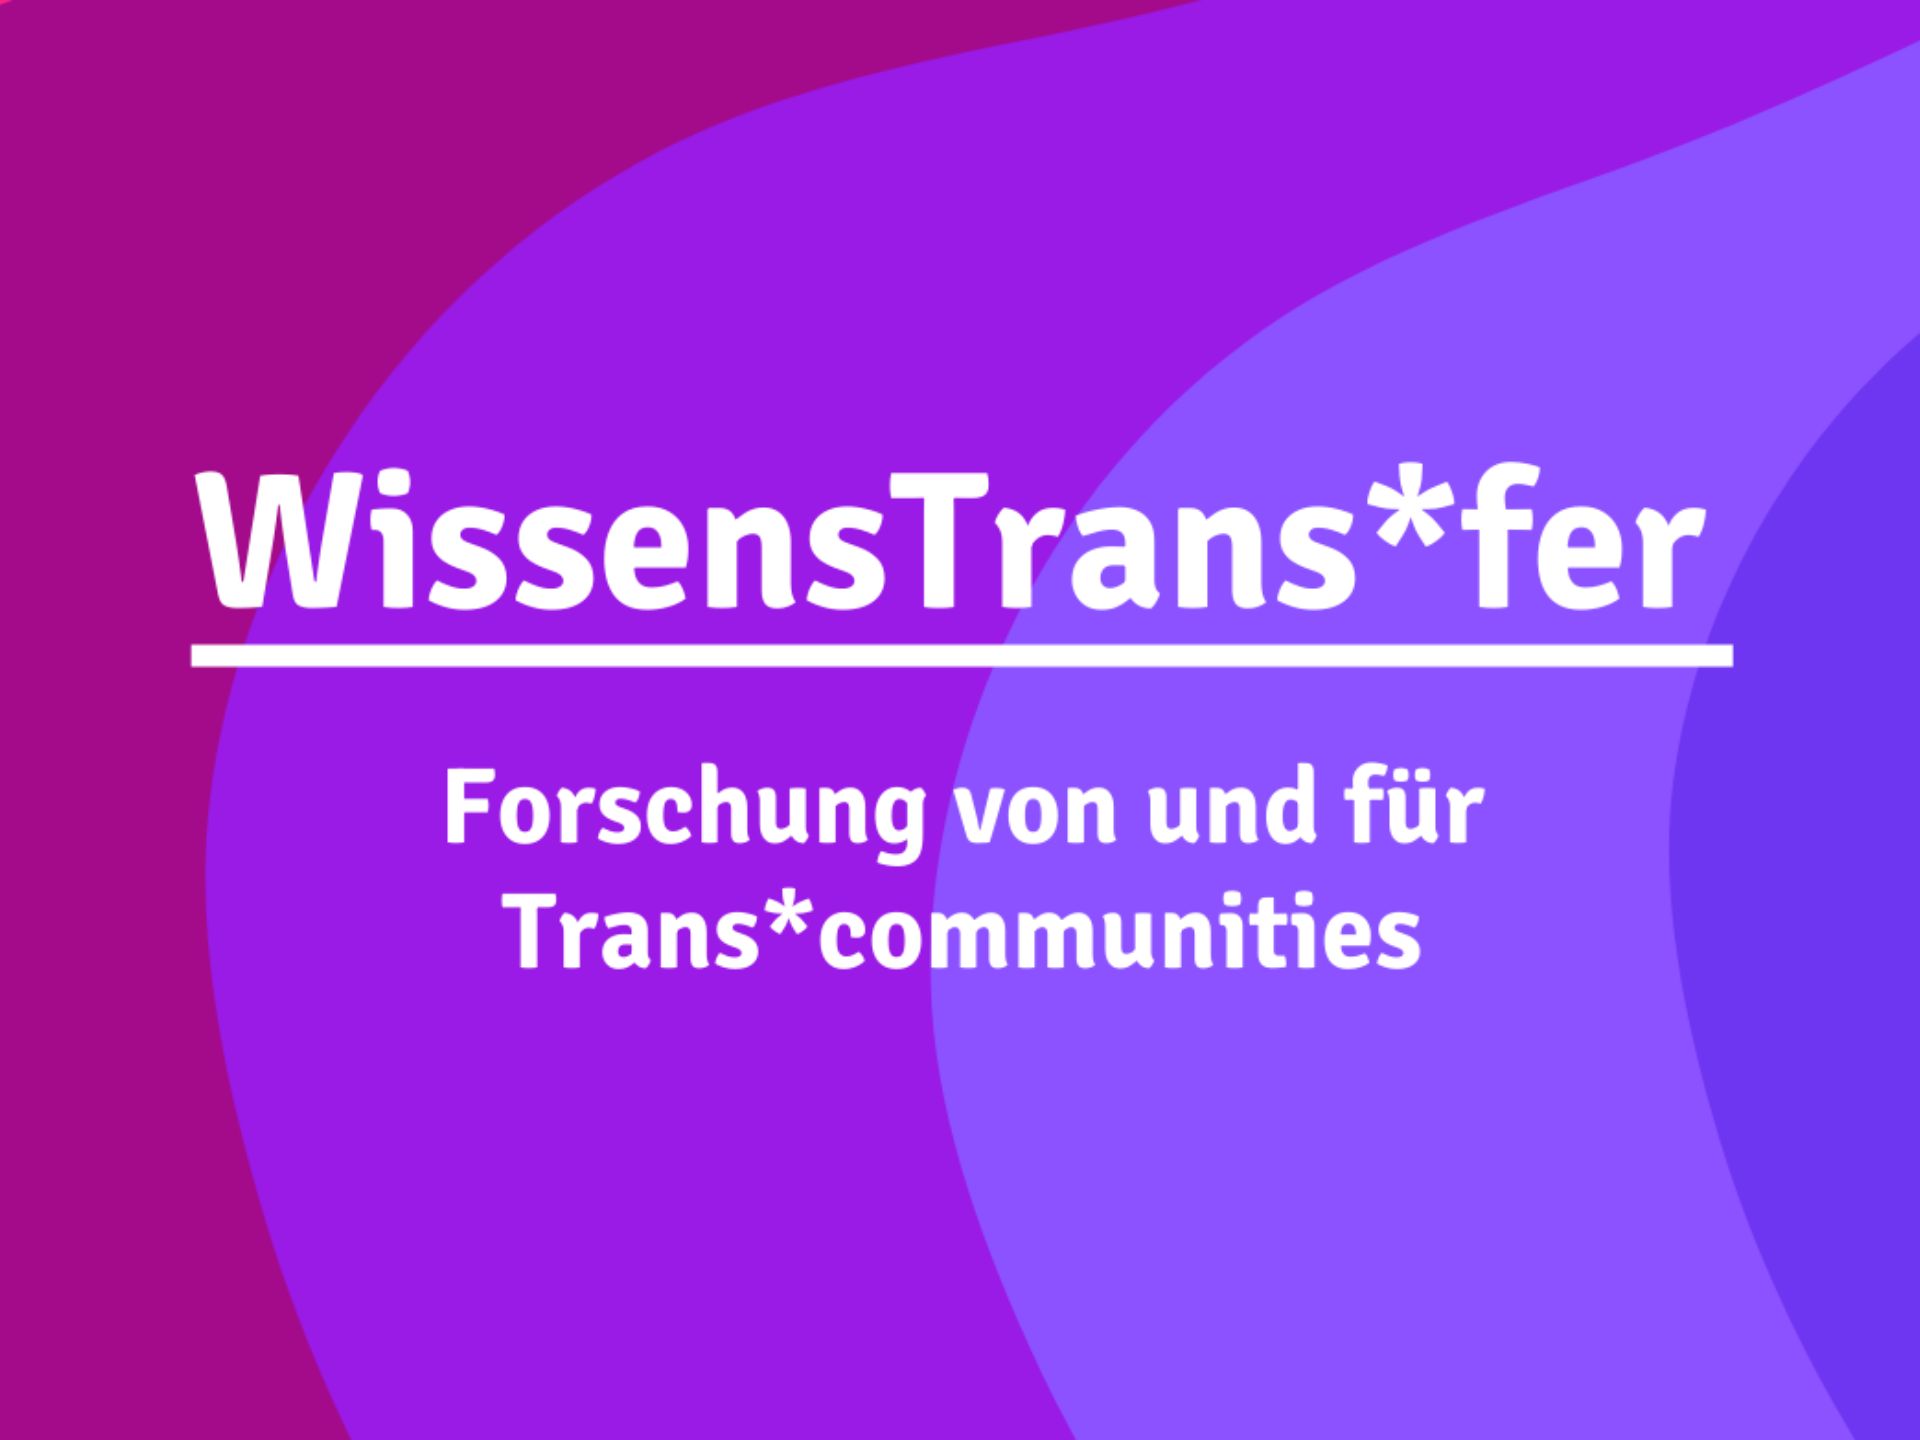 BVT*-Fachtage 2022 Knowledge Transfer – Research by and for Trans*communities